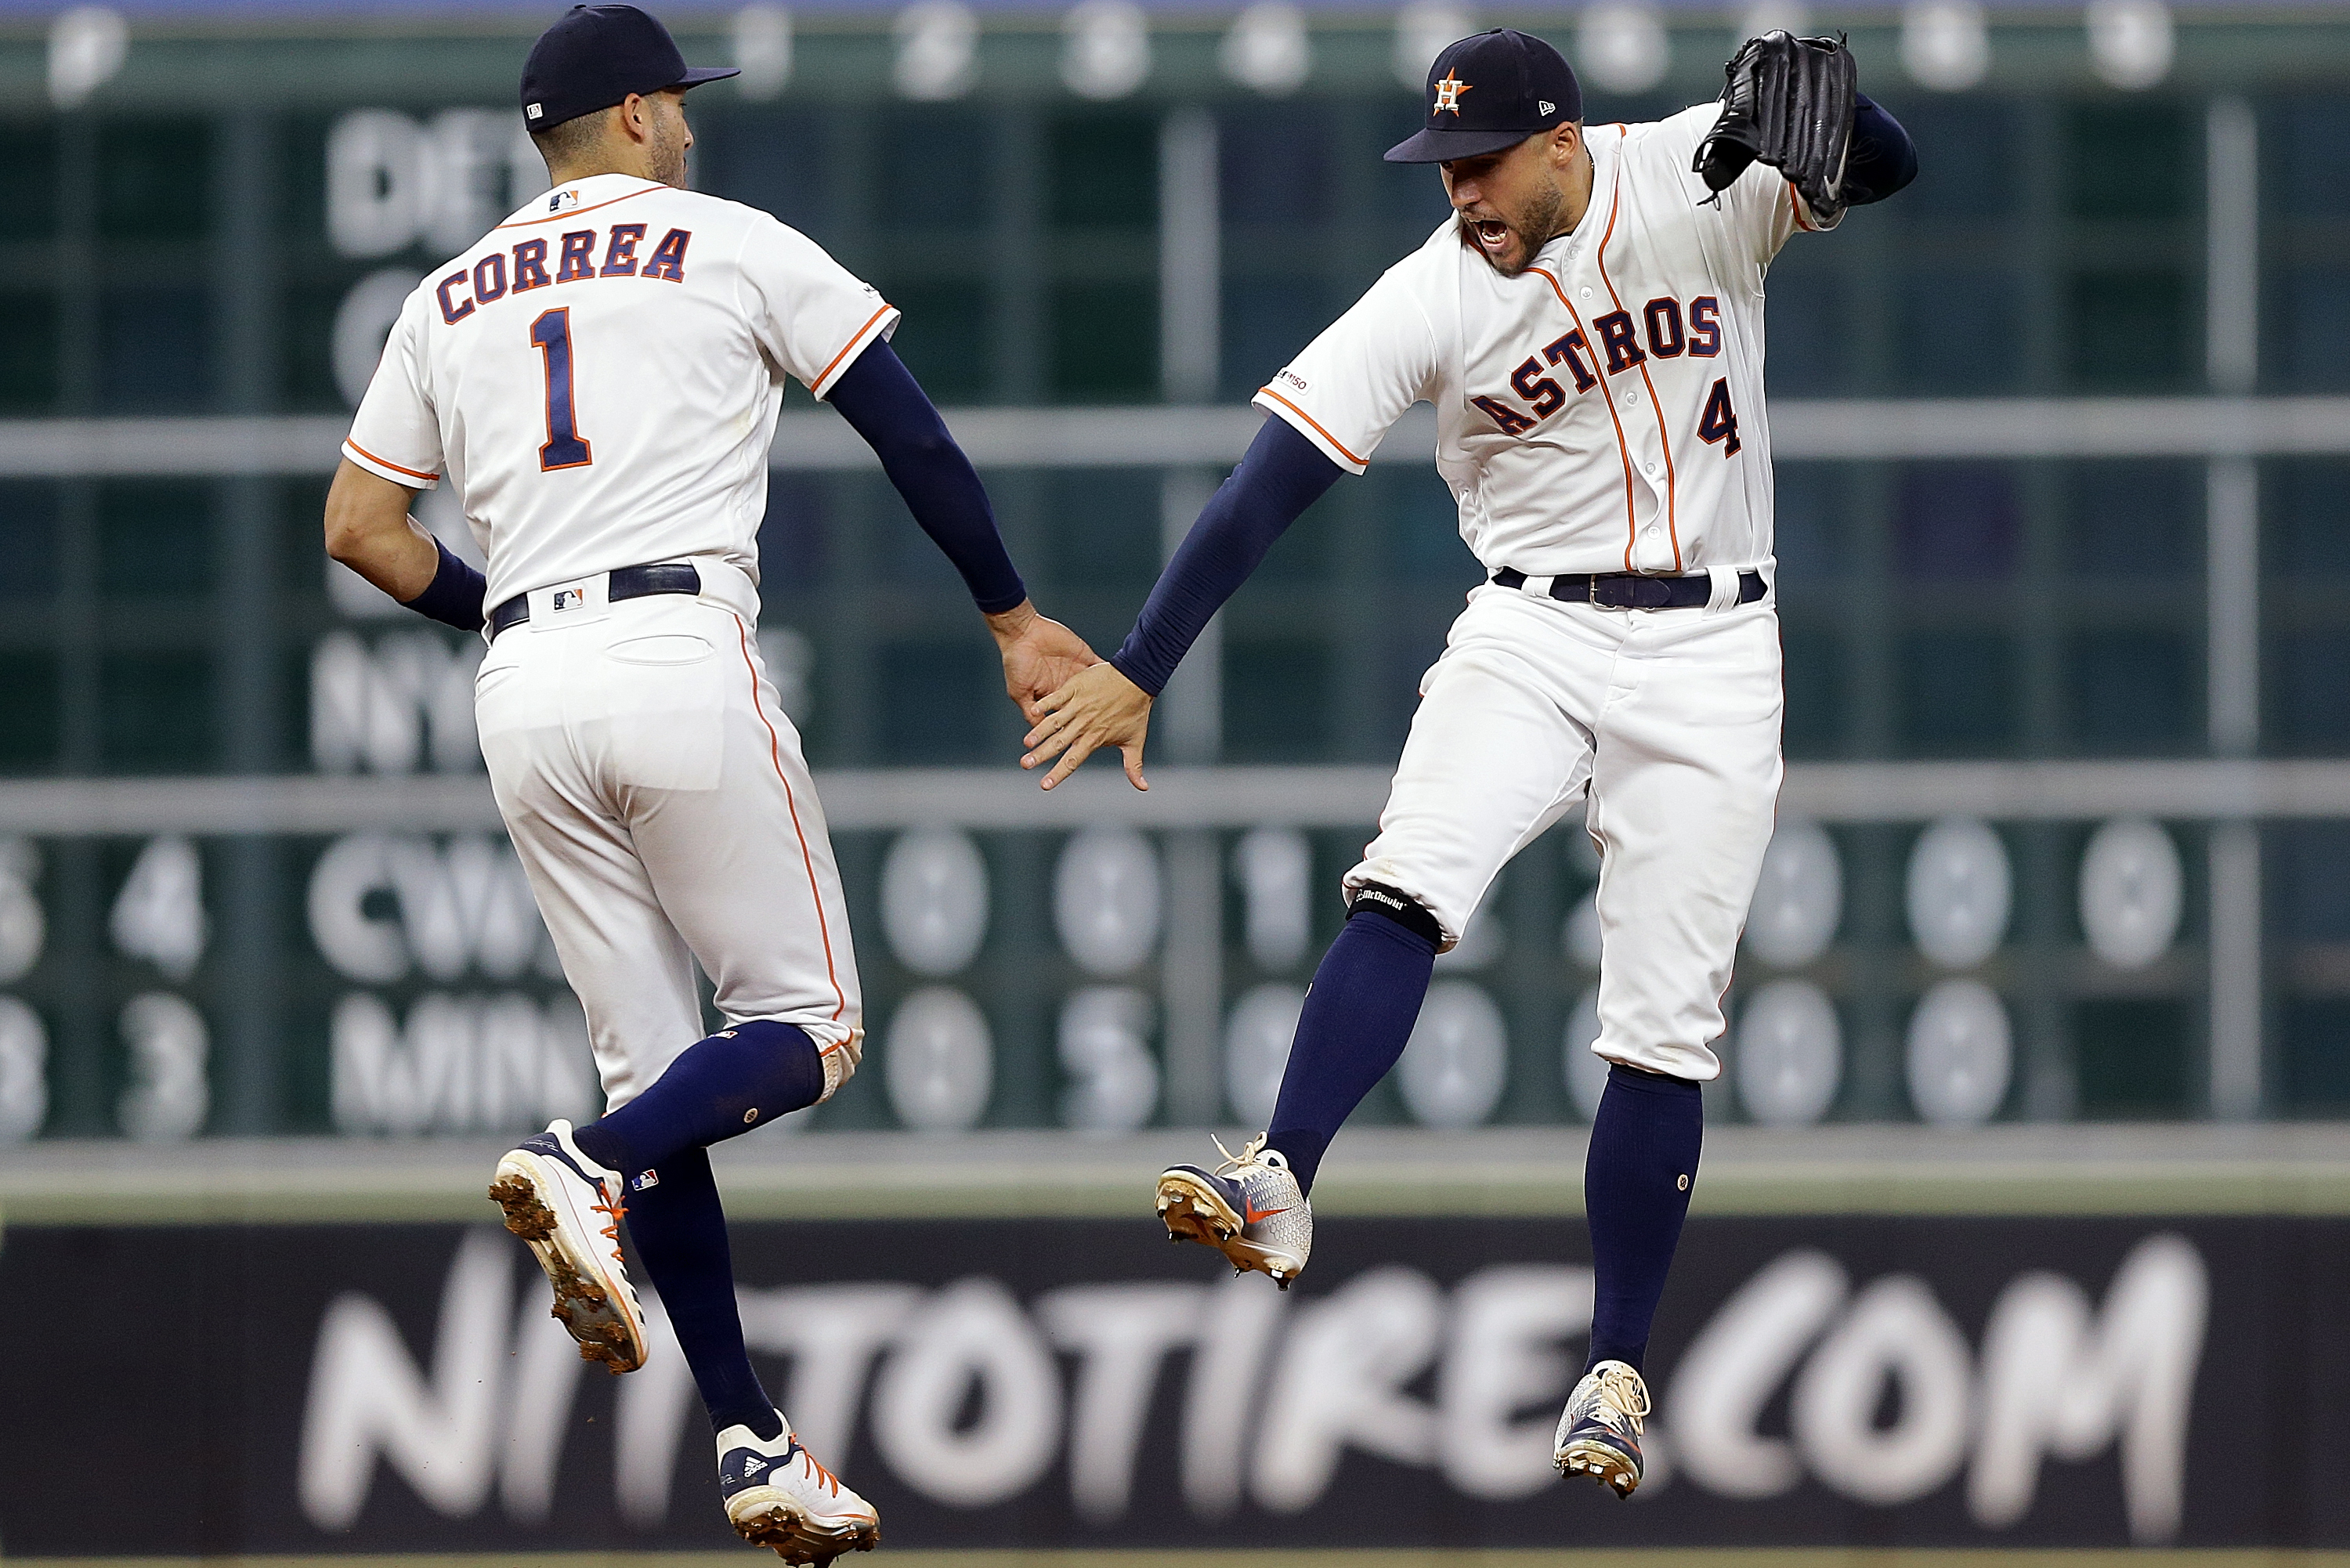 Houston Astros: Gerrit Cole gets 300th strikeout, team clinches berth